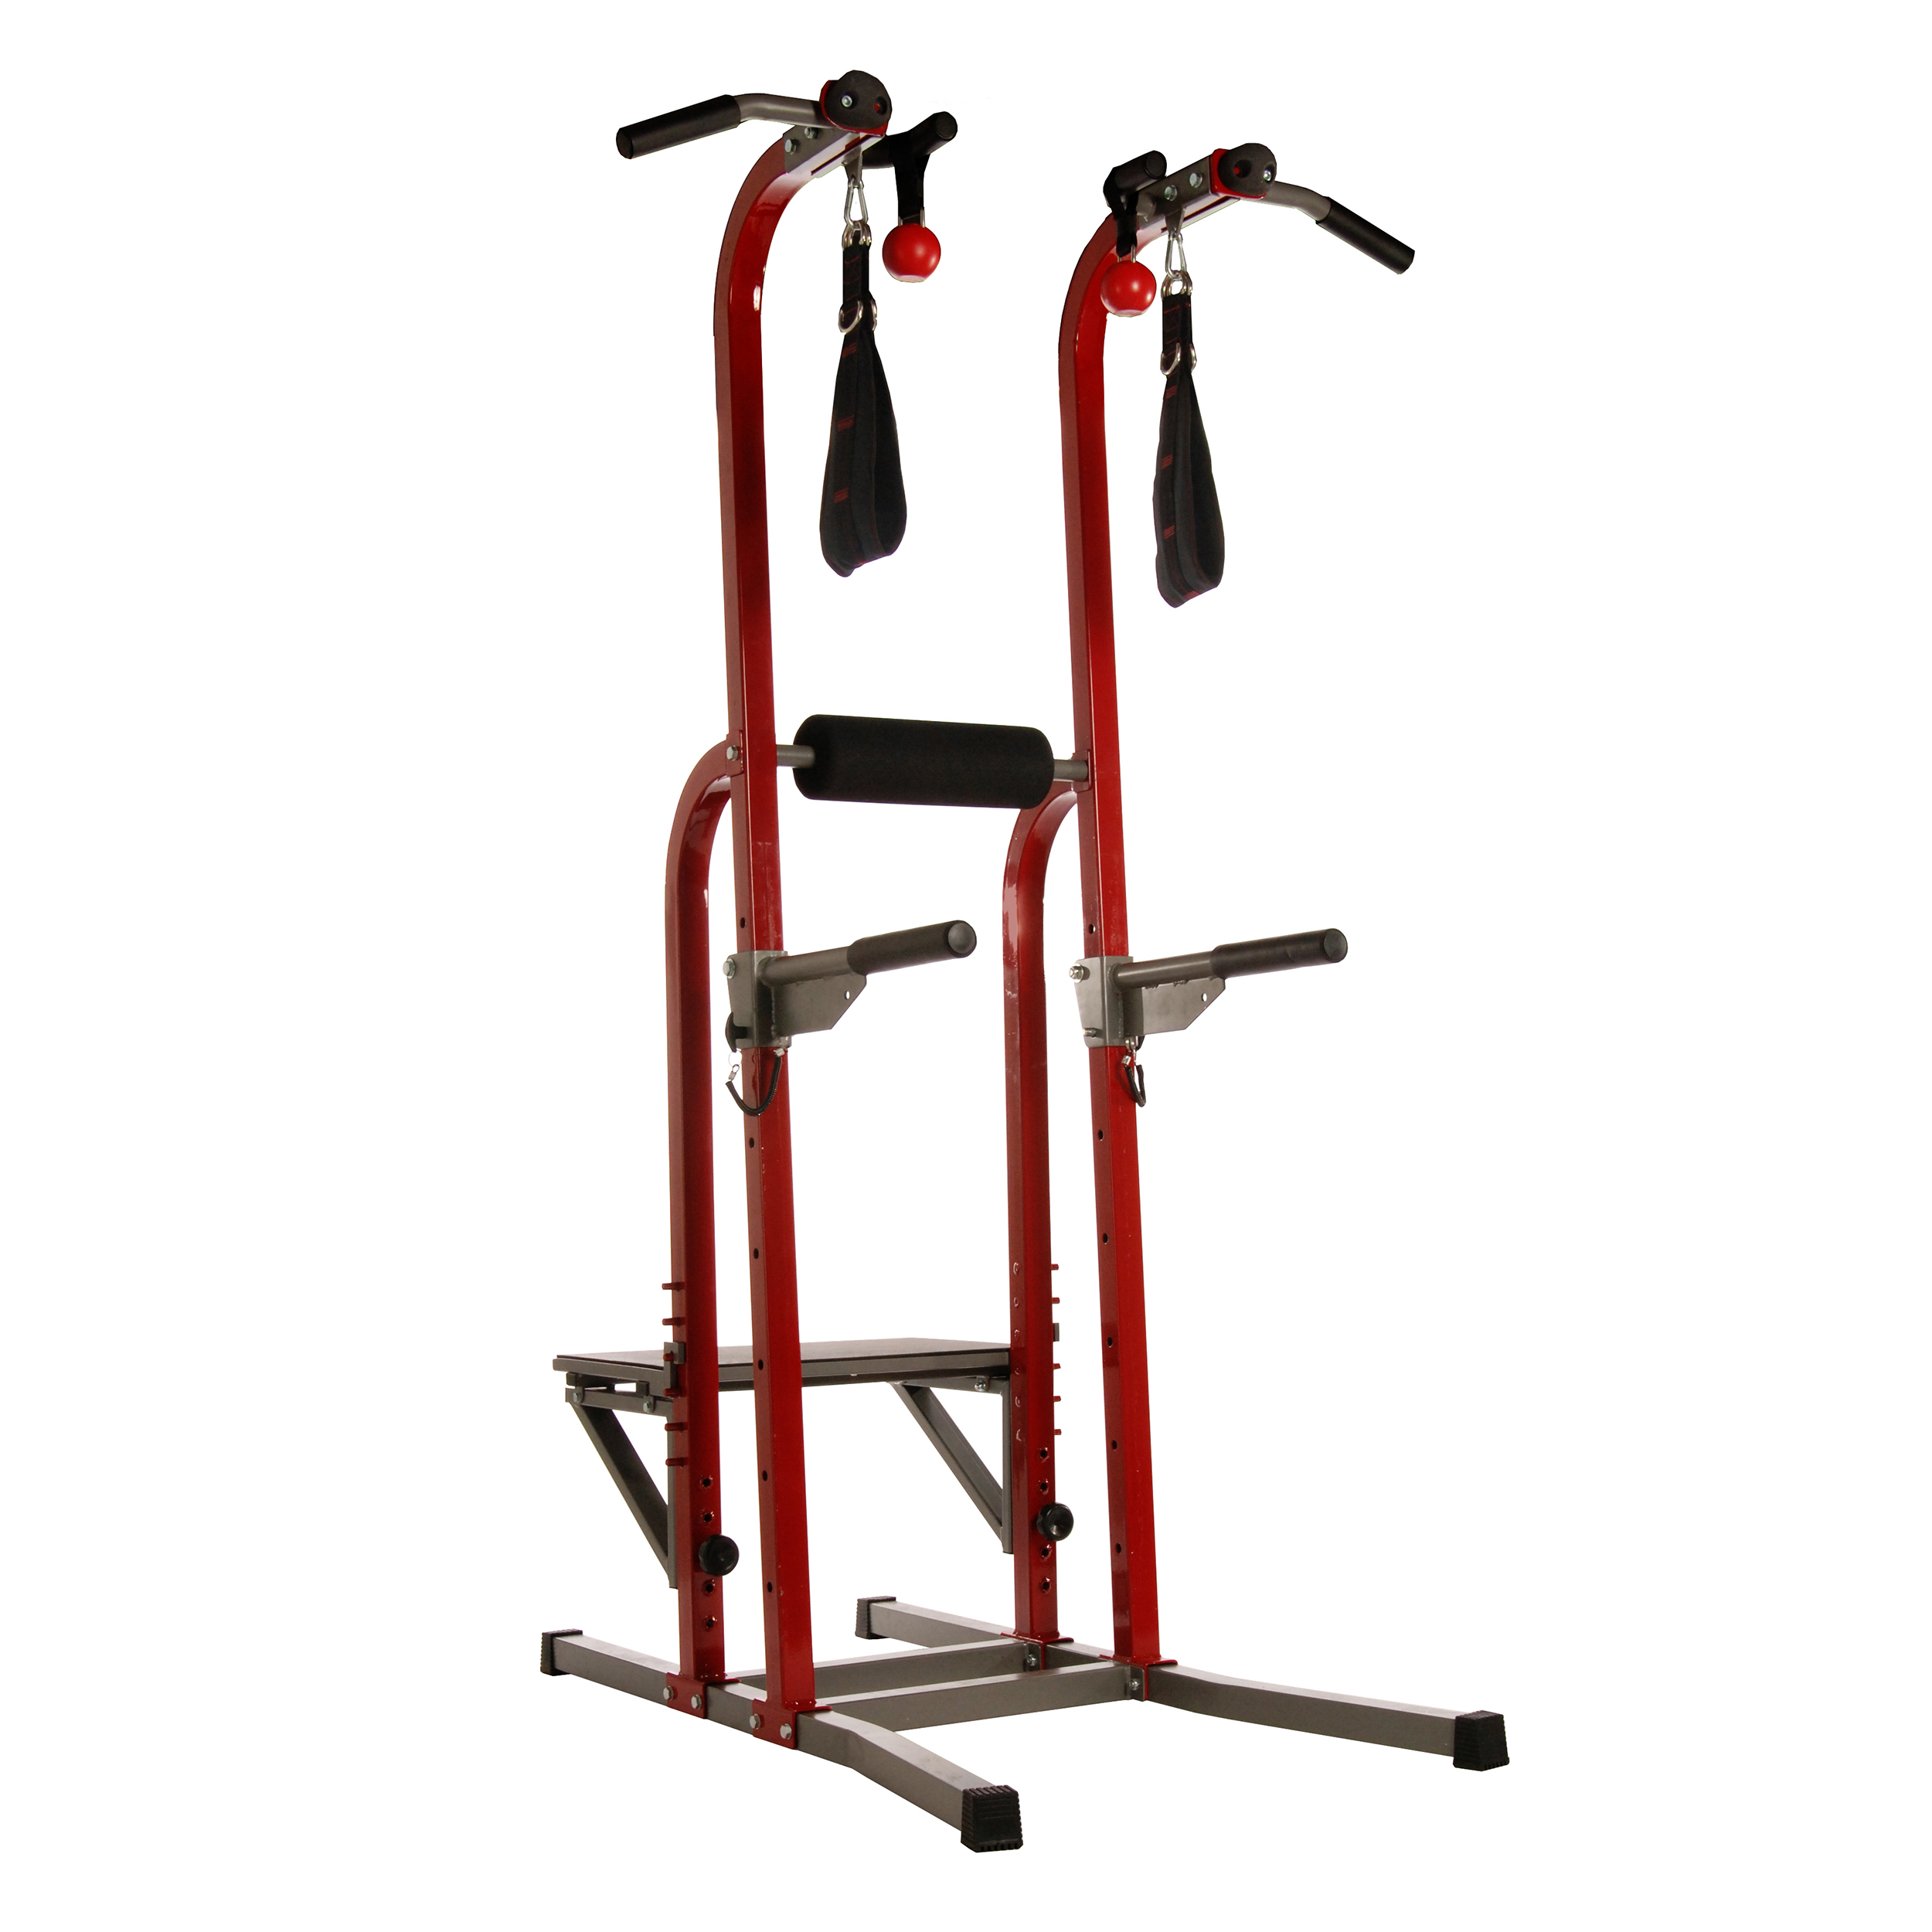 Stamina X Fortress Power Tower at home gym equipment use exercise